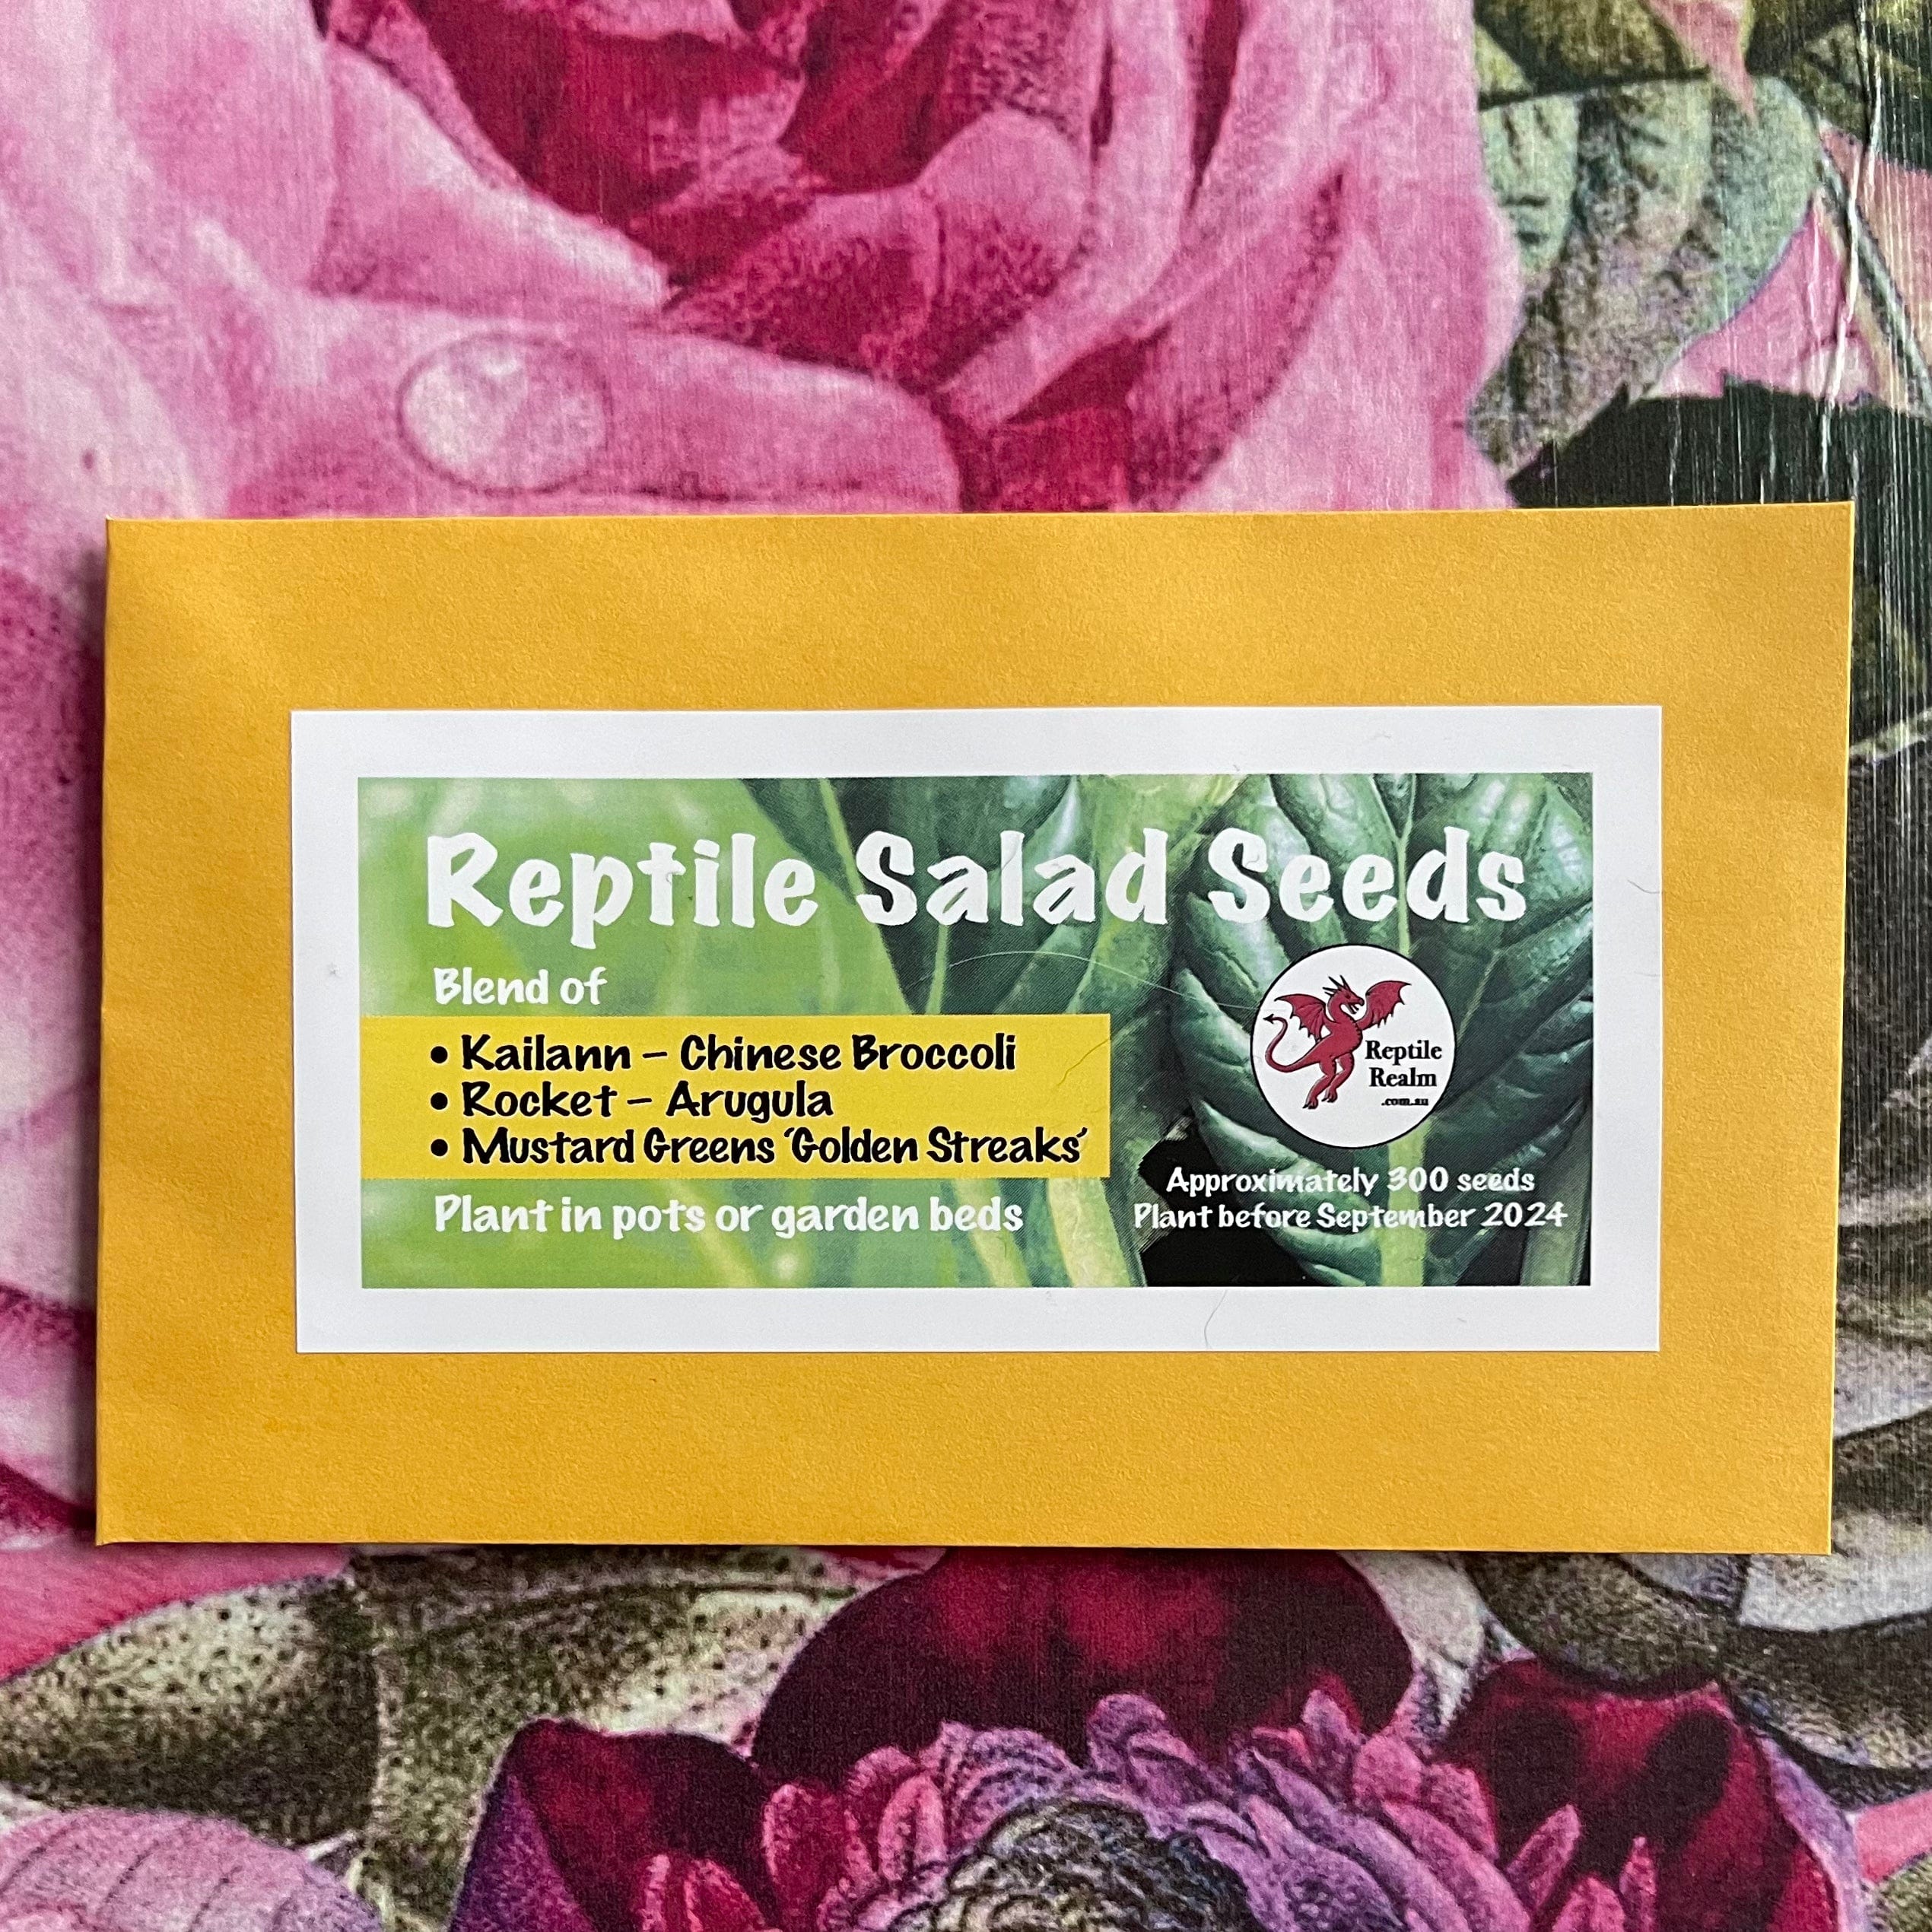 Reptile Realm Seed Blend Reptile Salad Seeds (Yellow Label) - Kailann, Mustard Greens and Rocket